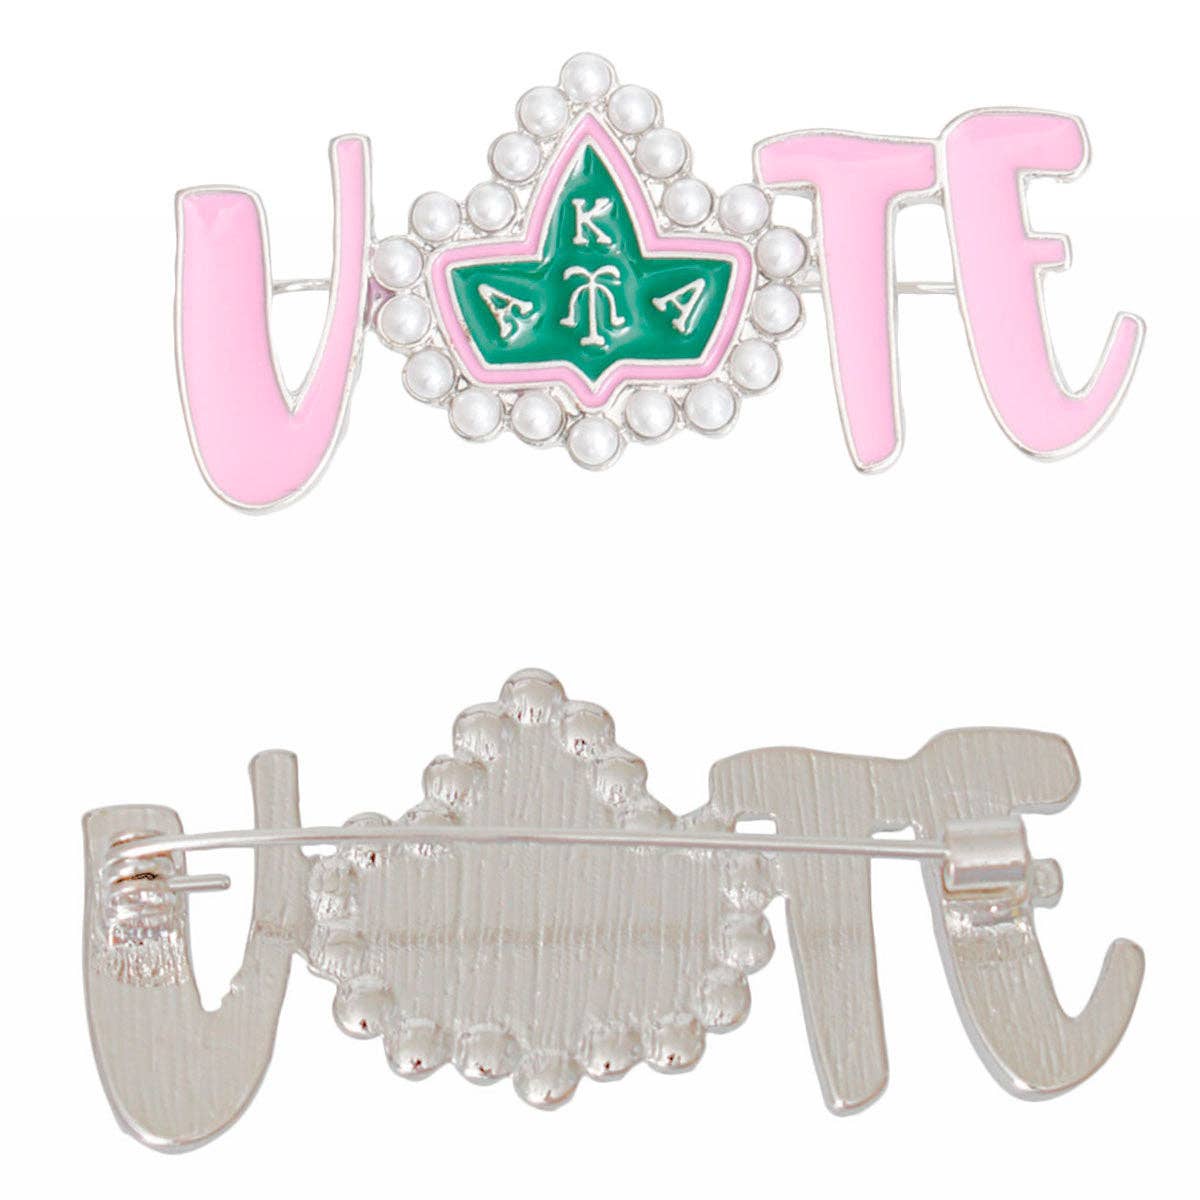 Brooch Alpha Kappa Alpha  Vote Sorority Pin for Women: .95 x 2.15 inches / Pink and Green / Rhodium